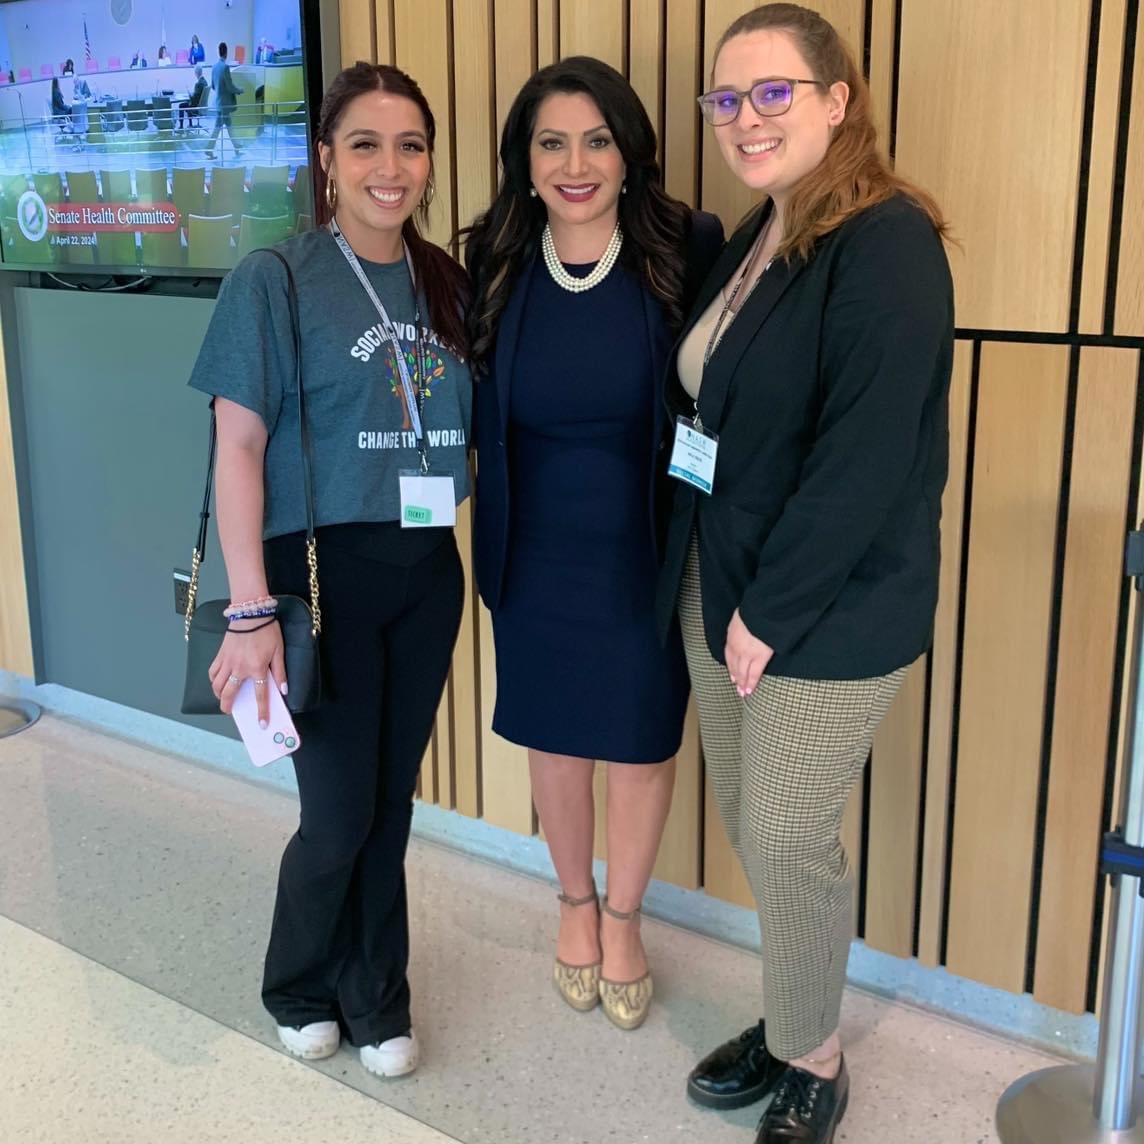 Met with two of my constituents from the @naswca in Sacramento today for their Legislative Lobby Day to advance social policies . Inspired by social workers’ dedication to professional growth and community well-being. #NASW #SocialWorkers #LegislativeLobbyDay